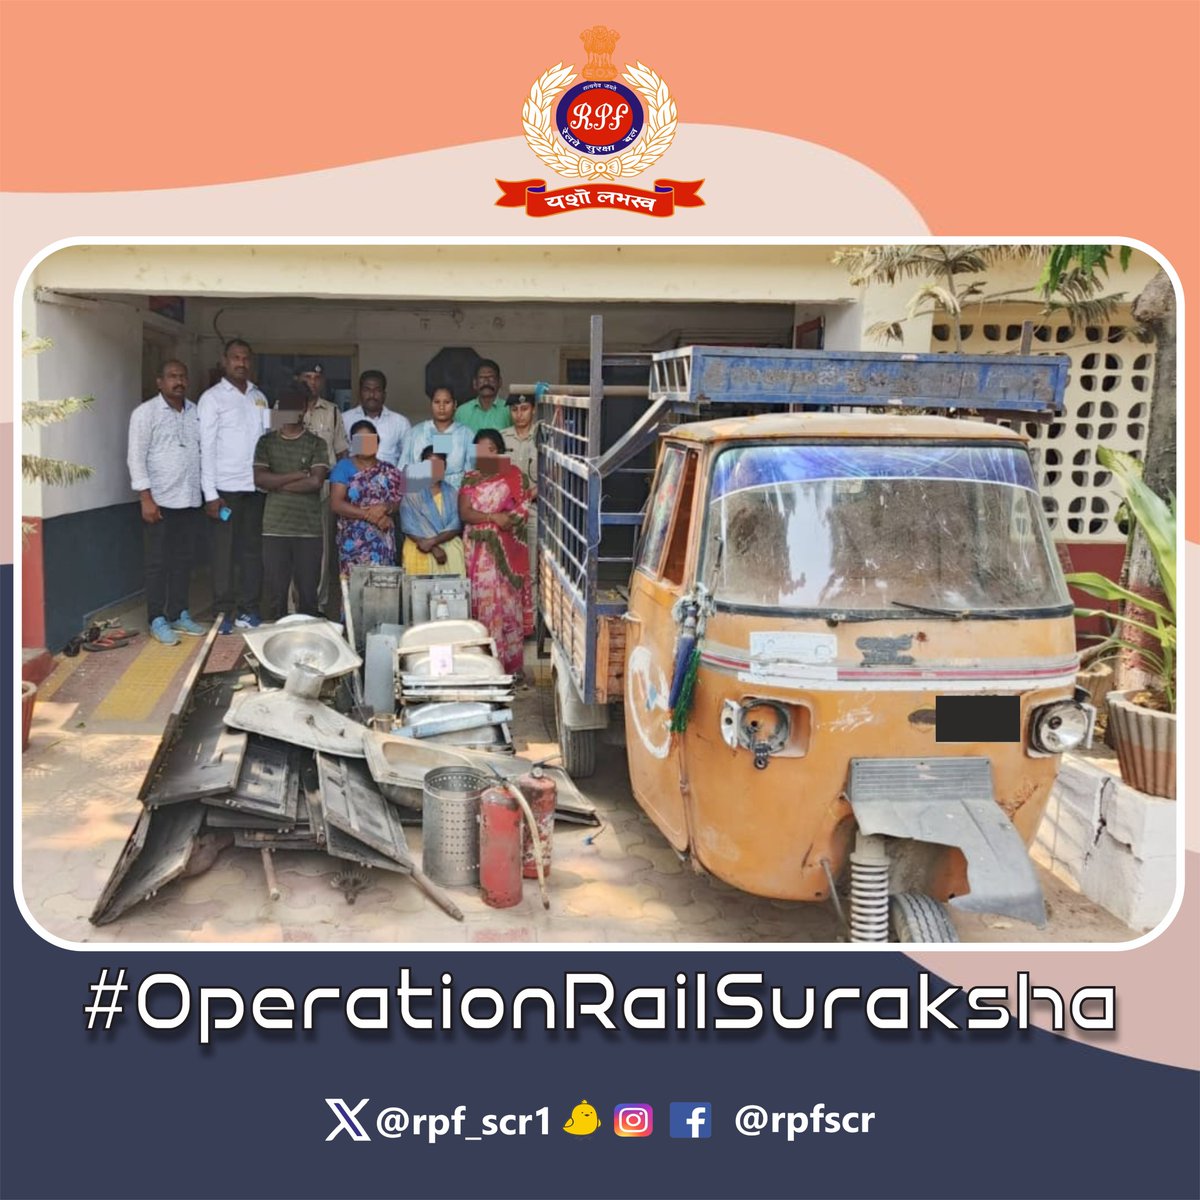 #RPF #Kazipet & sleuths of #Secunderabad arrested a gang of 4 members allegedly involved in theft of Railway Materials worth Rs.38,984/- using an auto trolley. 
#RPF on it’s toe to eradicate the crime from Railways. #OperationRailSuraksha.
@RPF_INDIA @RailMinIndia @rpfscr_sc